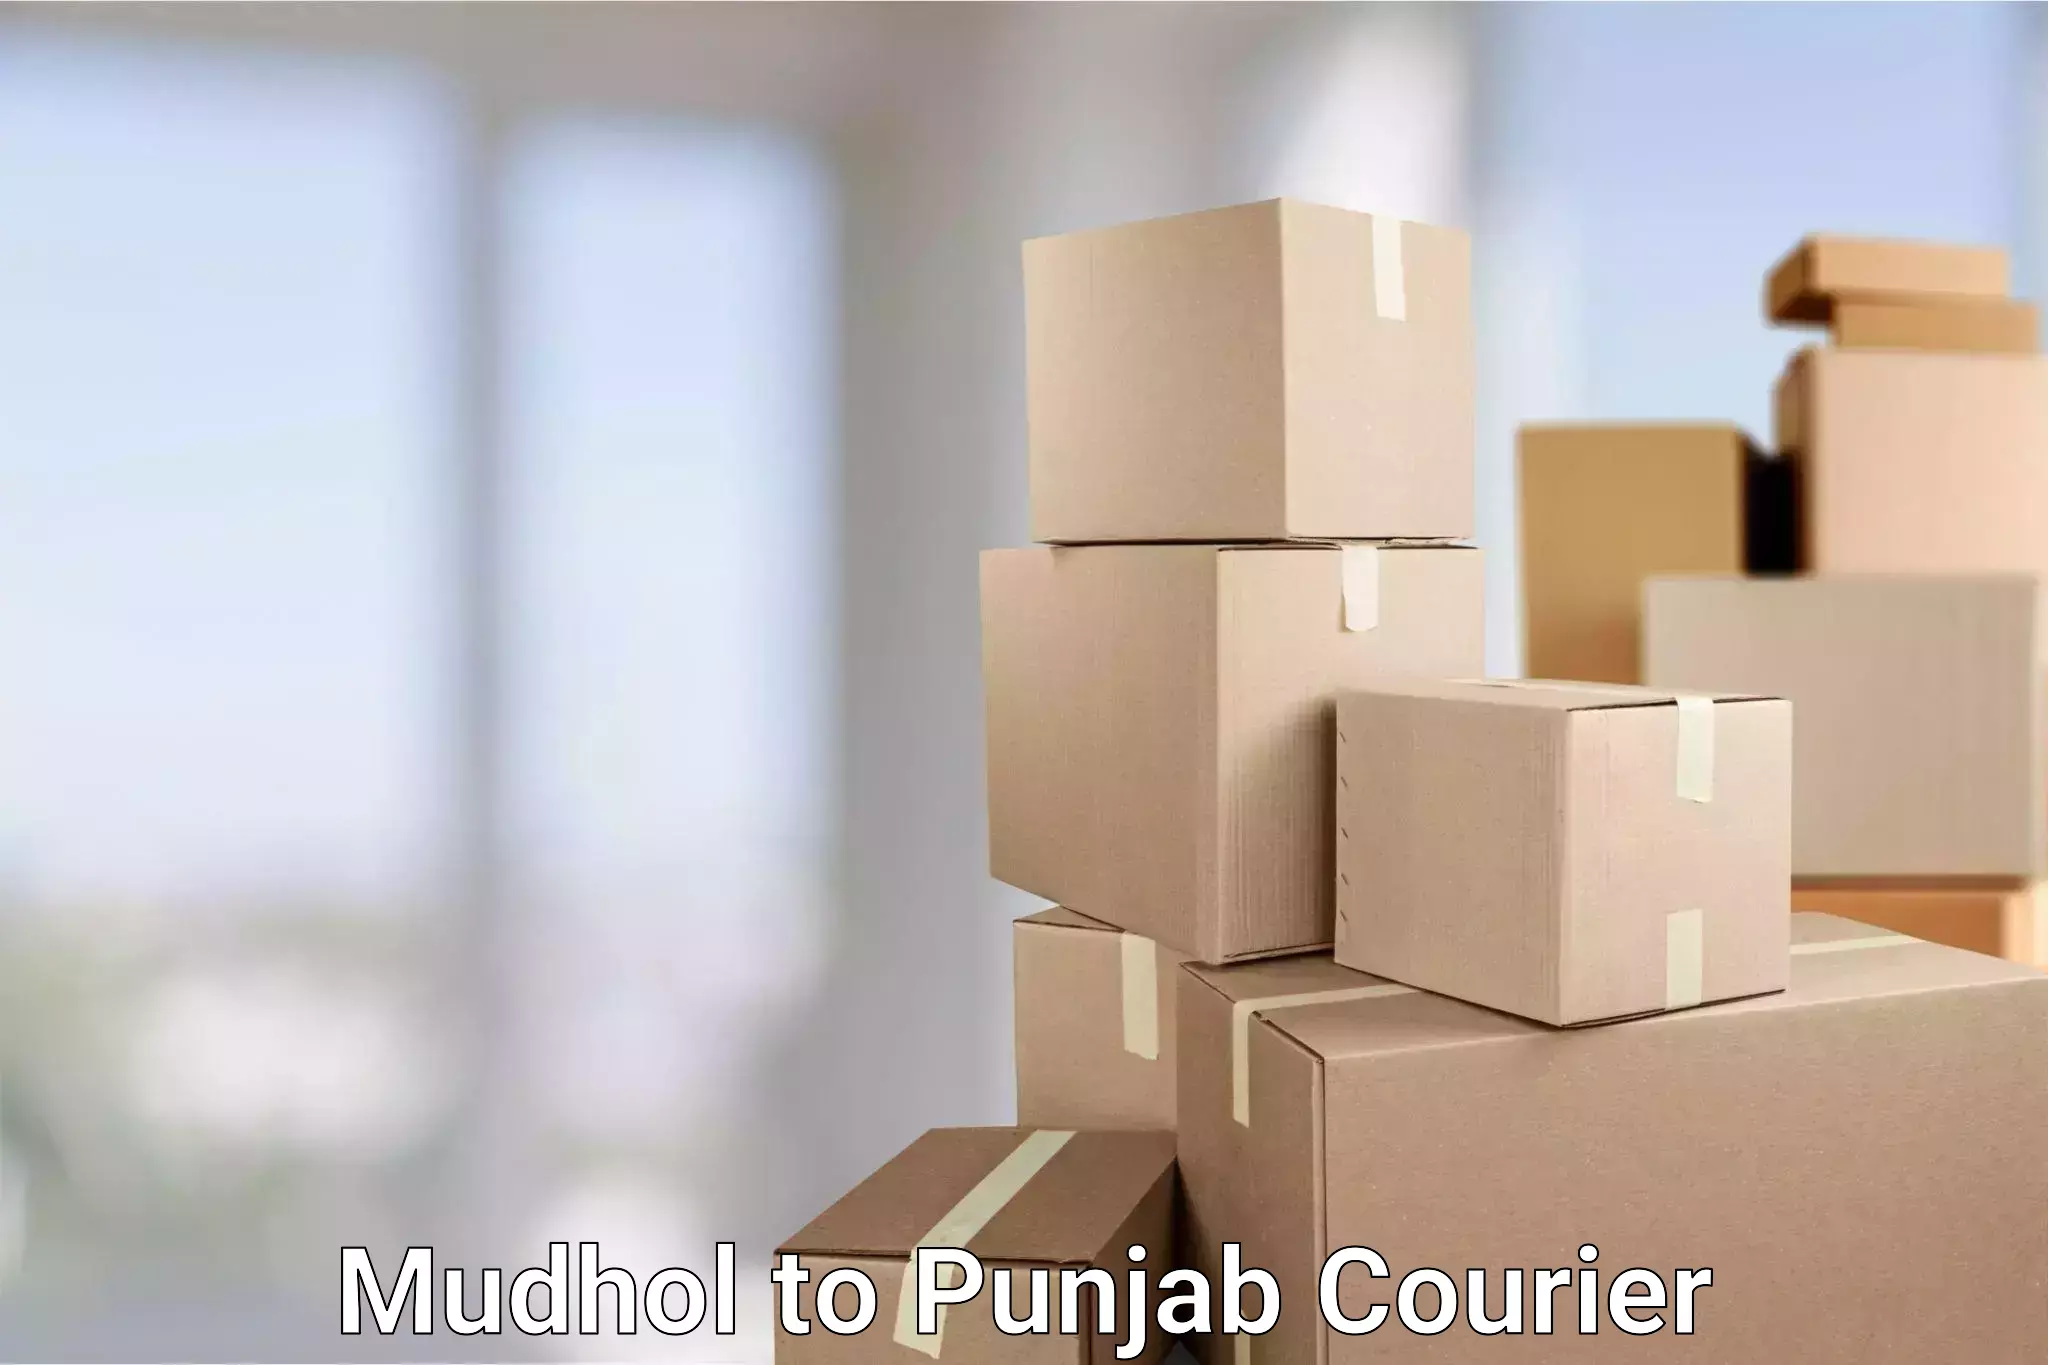 Full-service courier options Mudhol to Punjab